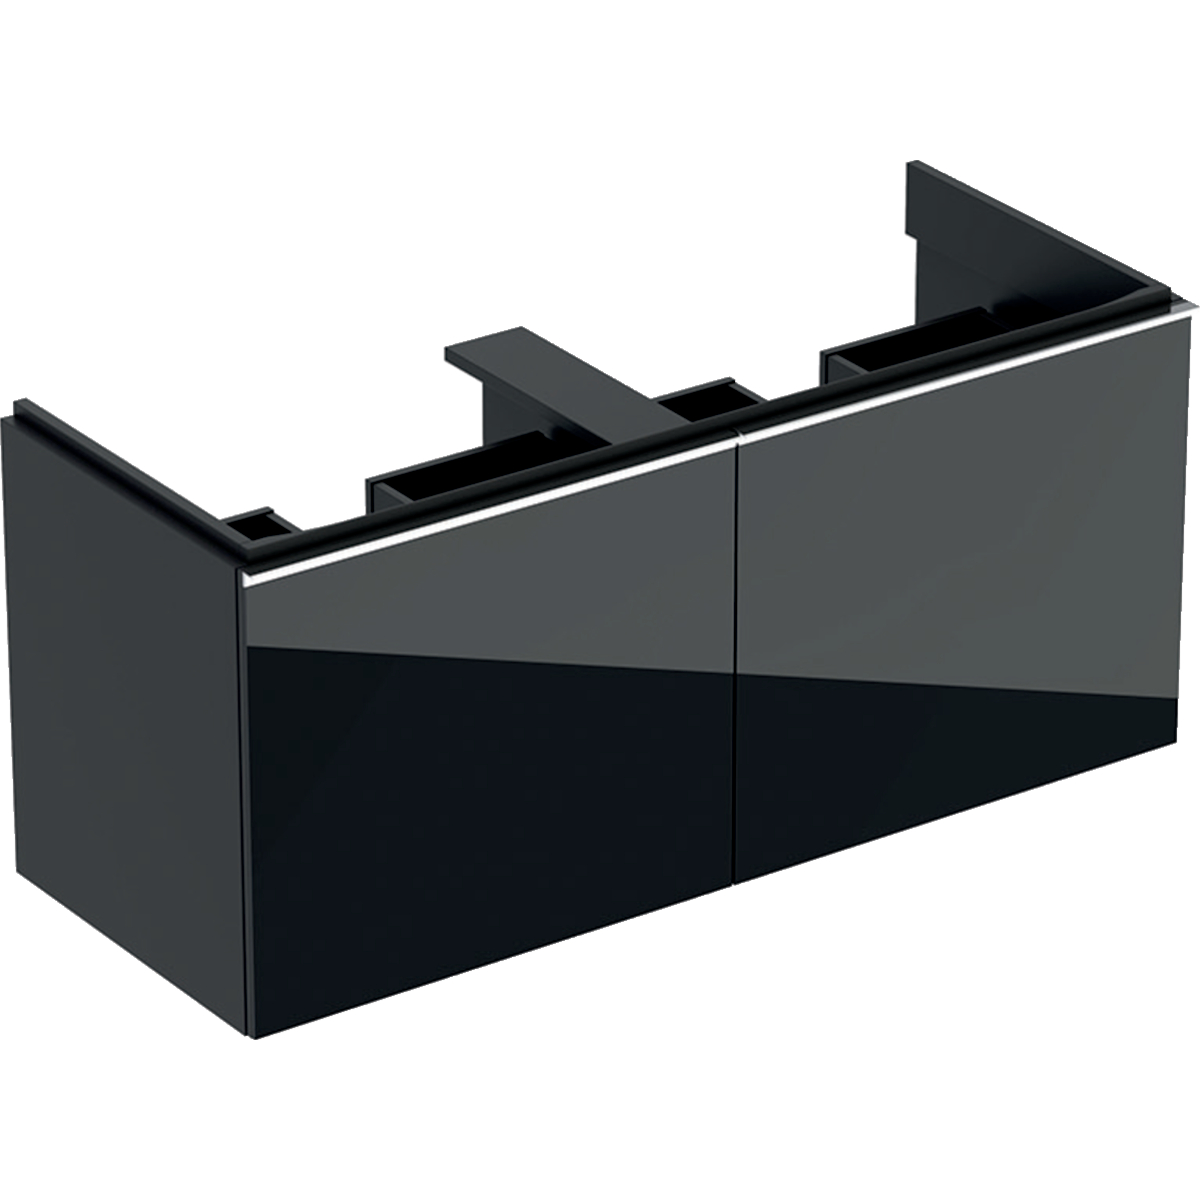 Geberit 500613JK2 Acanto 1190mm Vanity Unit for Double Basin with Drawers - Lava (BASIN NOT INCLUDED)